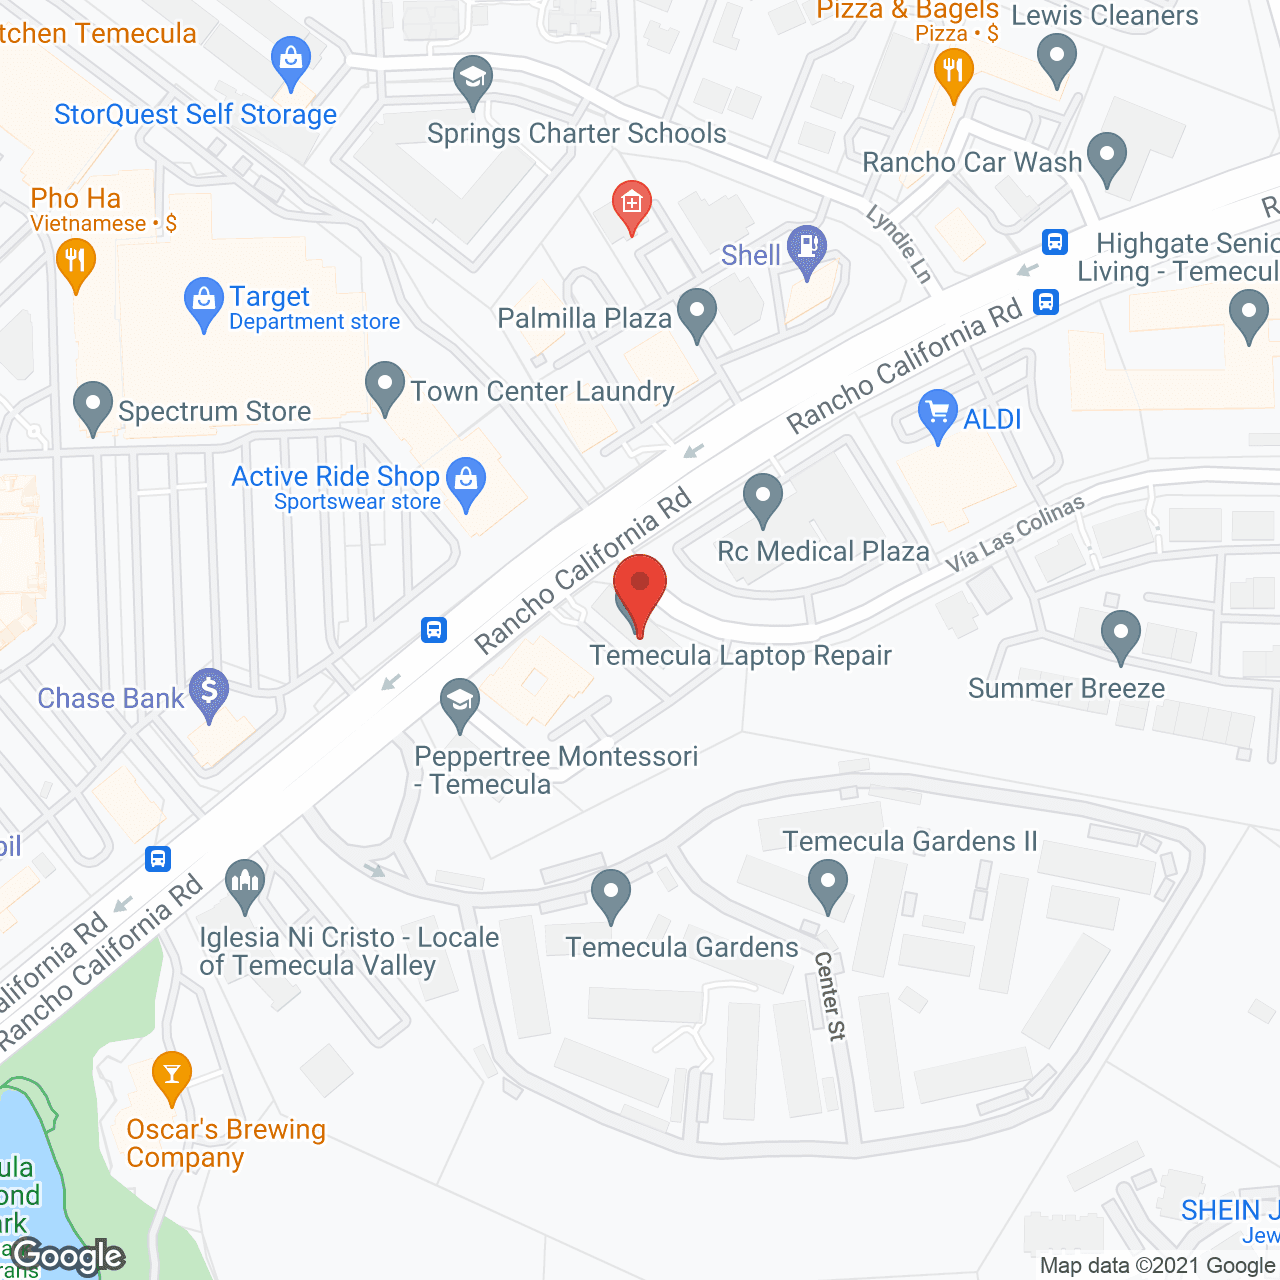 Never Alone Living Assistance - Temecula in google map